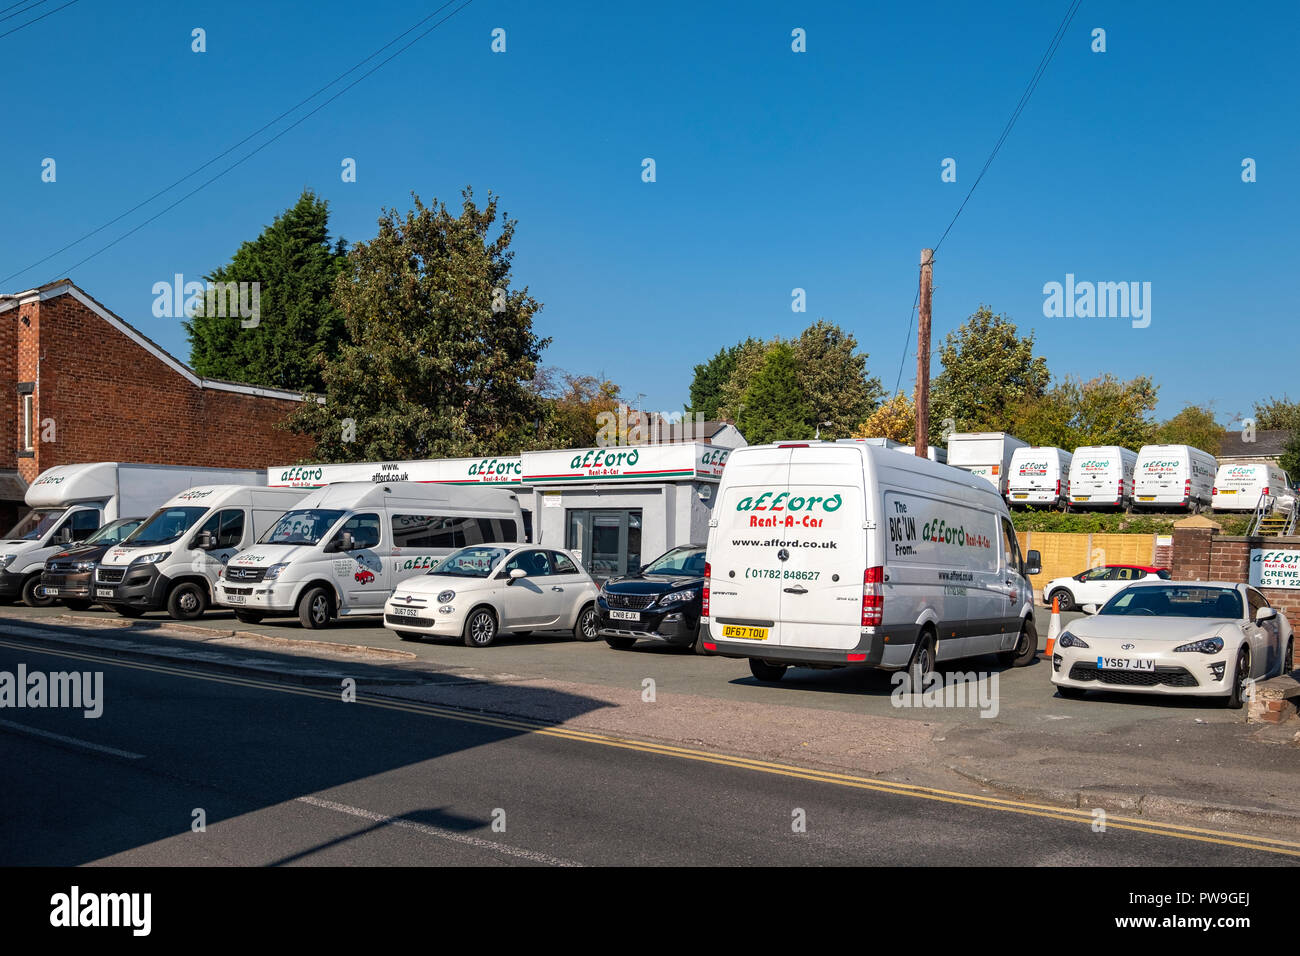 Afford rent-a-car depot in Crewe Cheshire UK Stock Photo